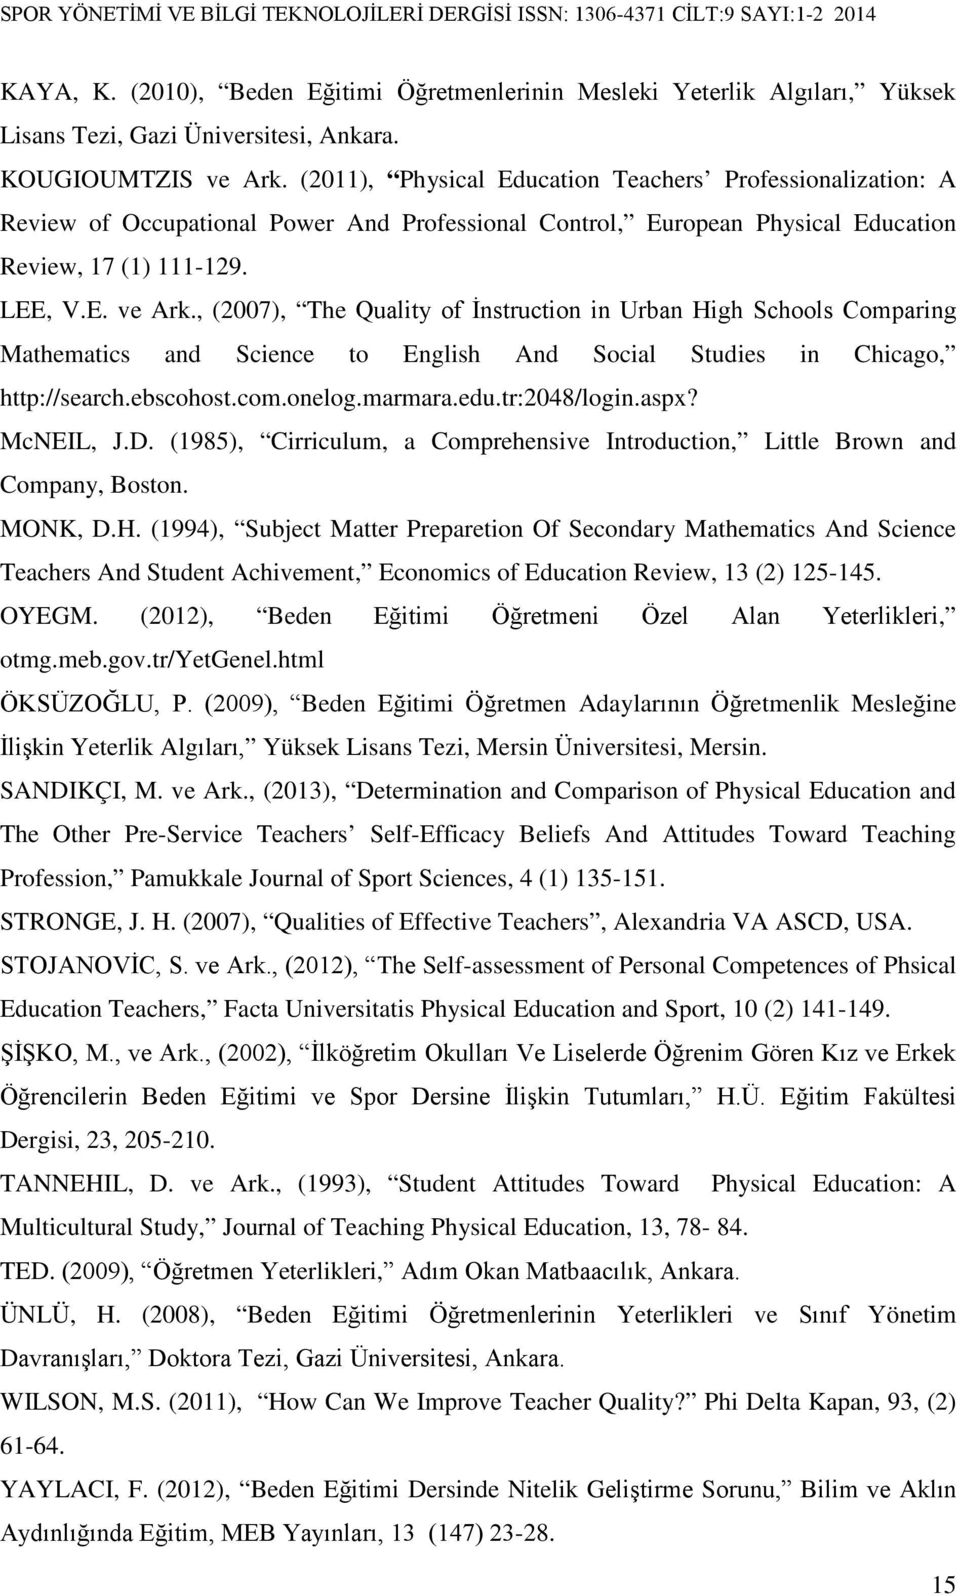 , (2007), The Quality of İnstruction in Urban High Schools Comparing Mathematics and Science to English And Social Studies in Chicago, http://search.ebscohost.com.onelog.marmara.edu.tr:2048/login.